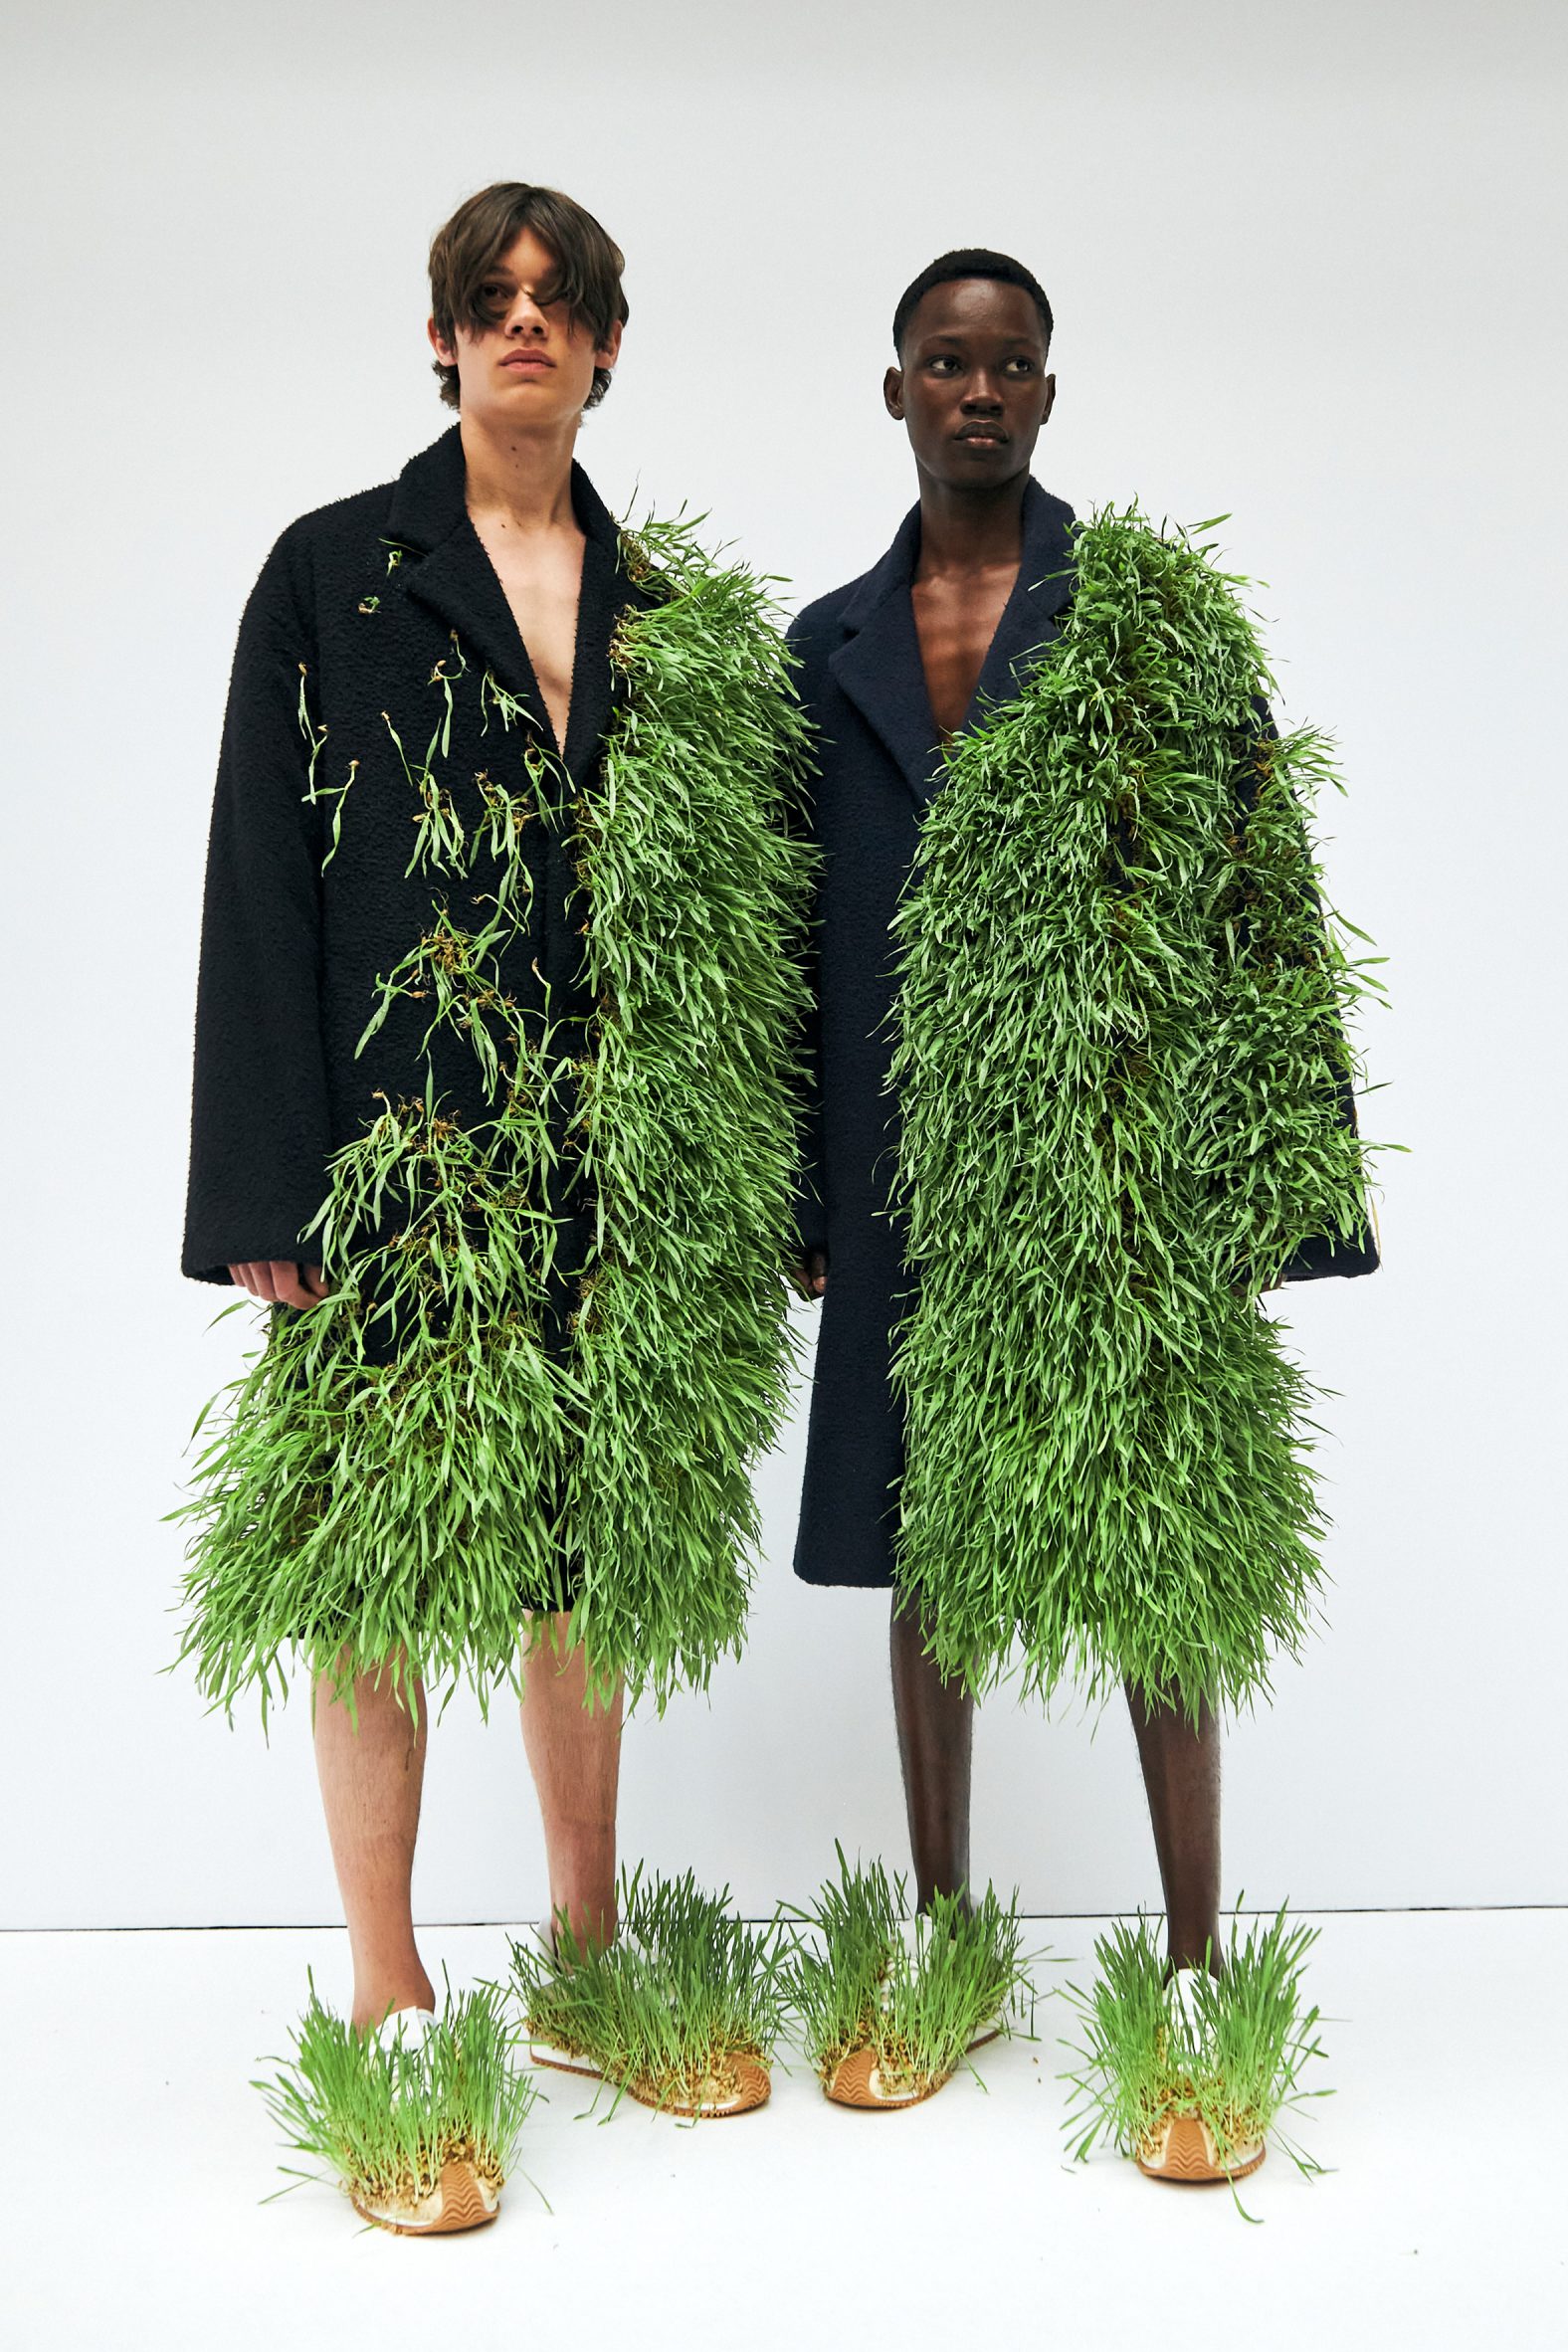 Loewe sprouts grasses and plants from sodden clothes at Paris